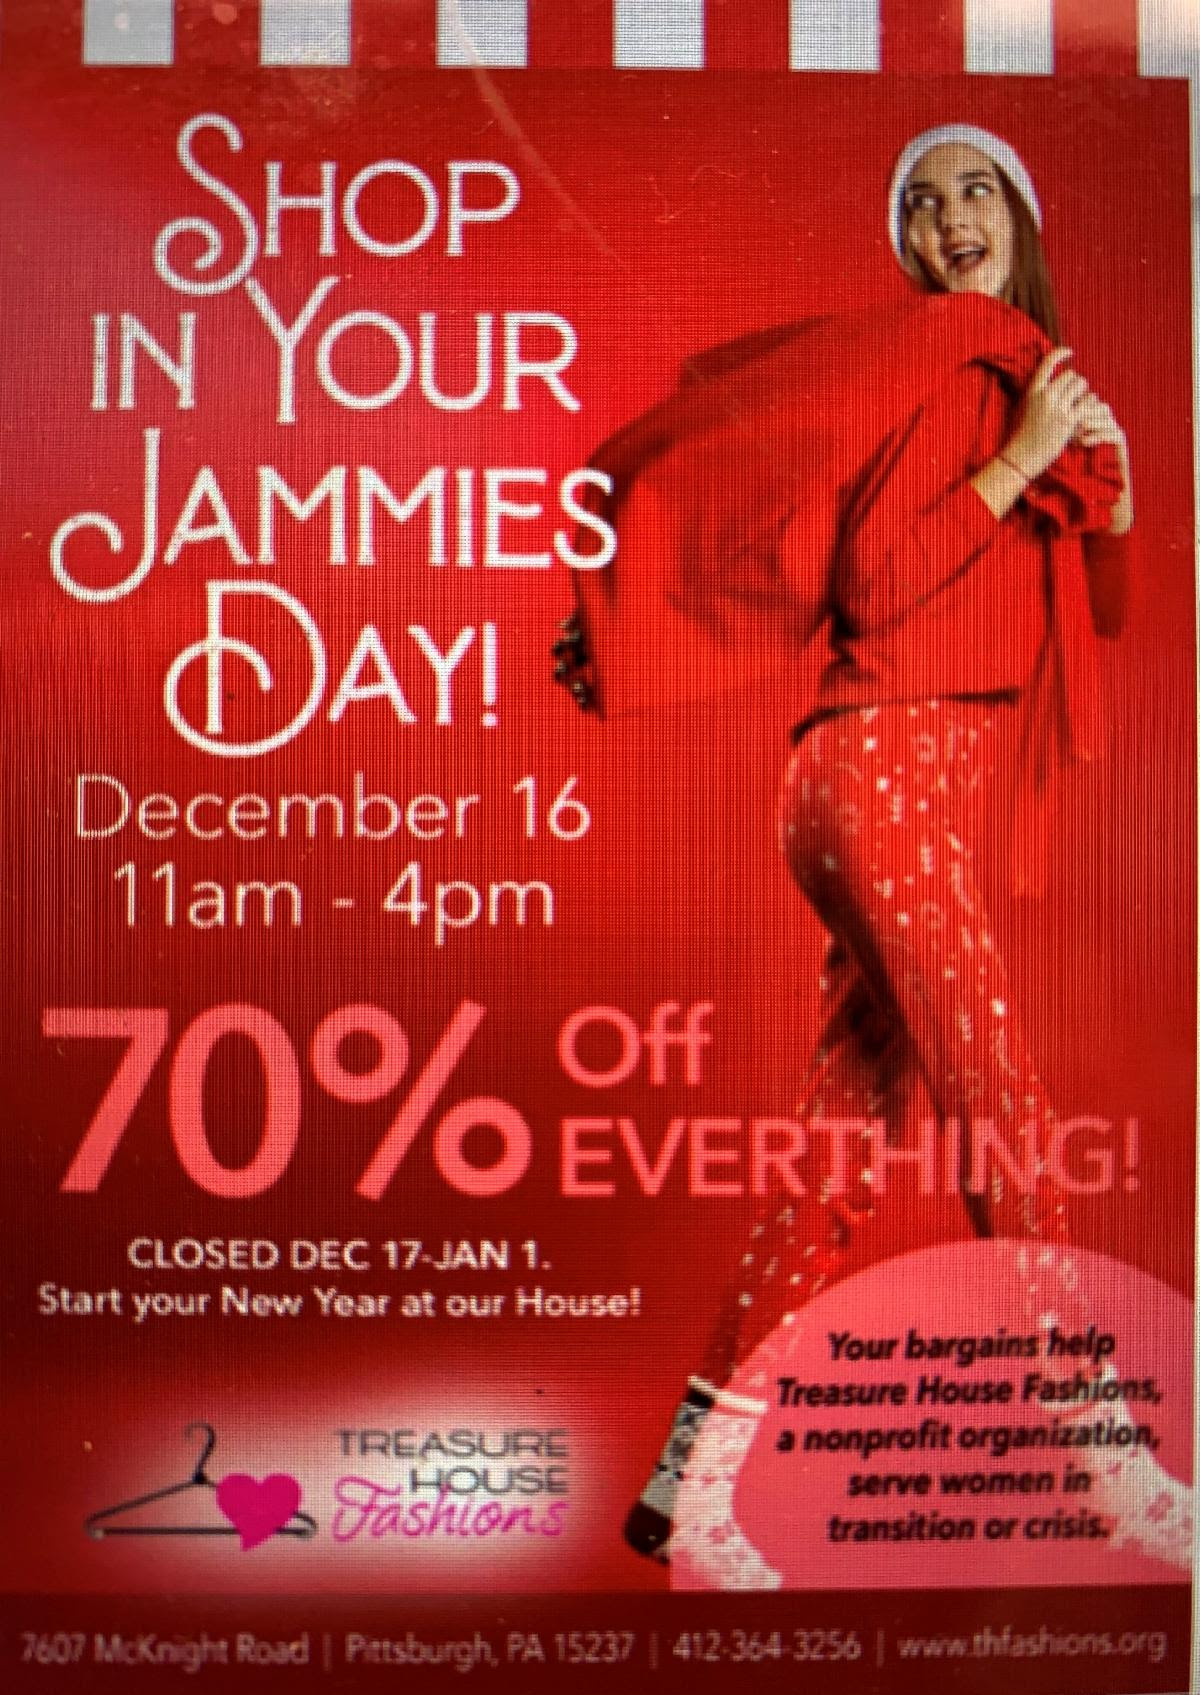 It's the Most Wonderful Day...for COMFY shopping!